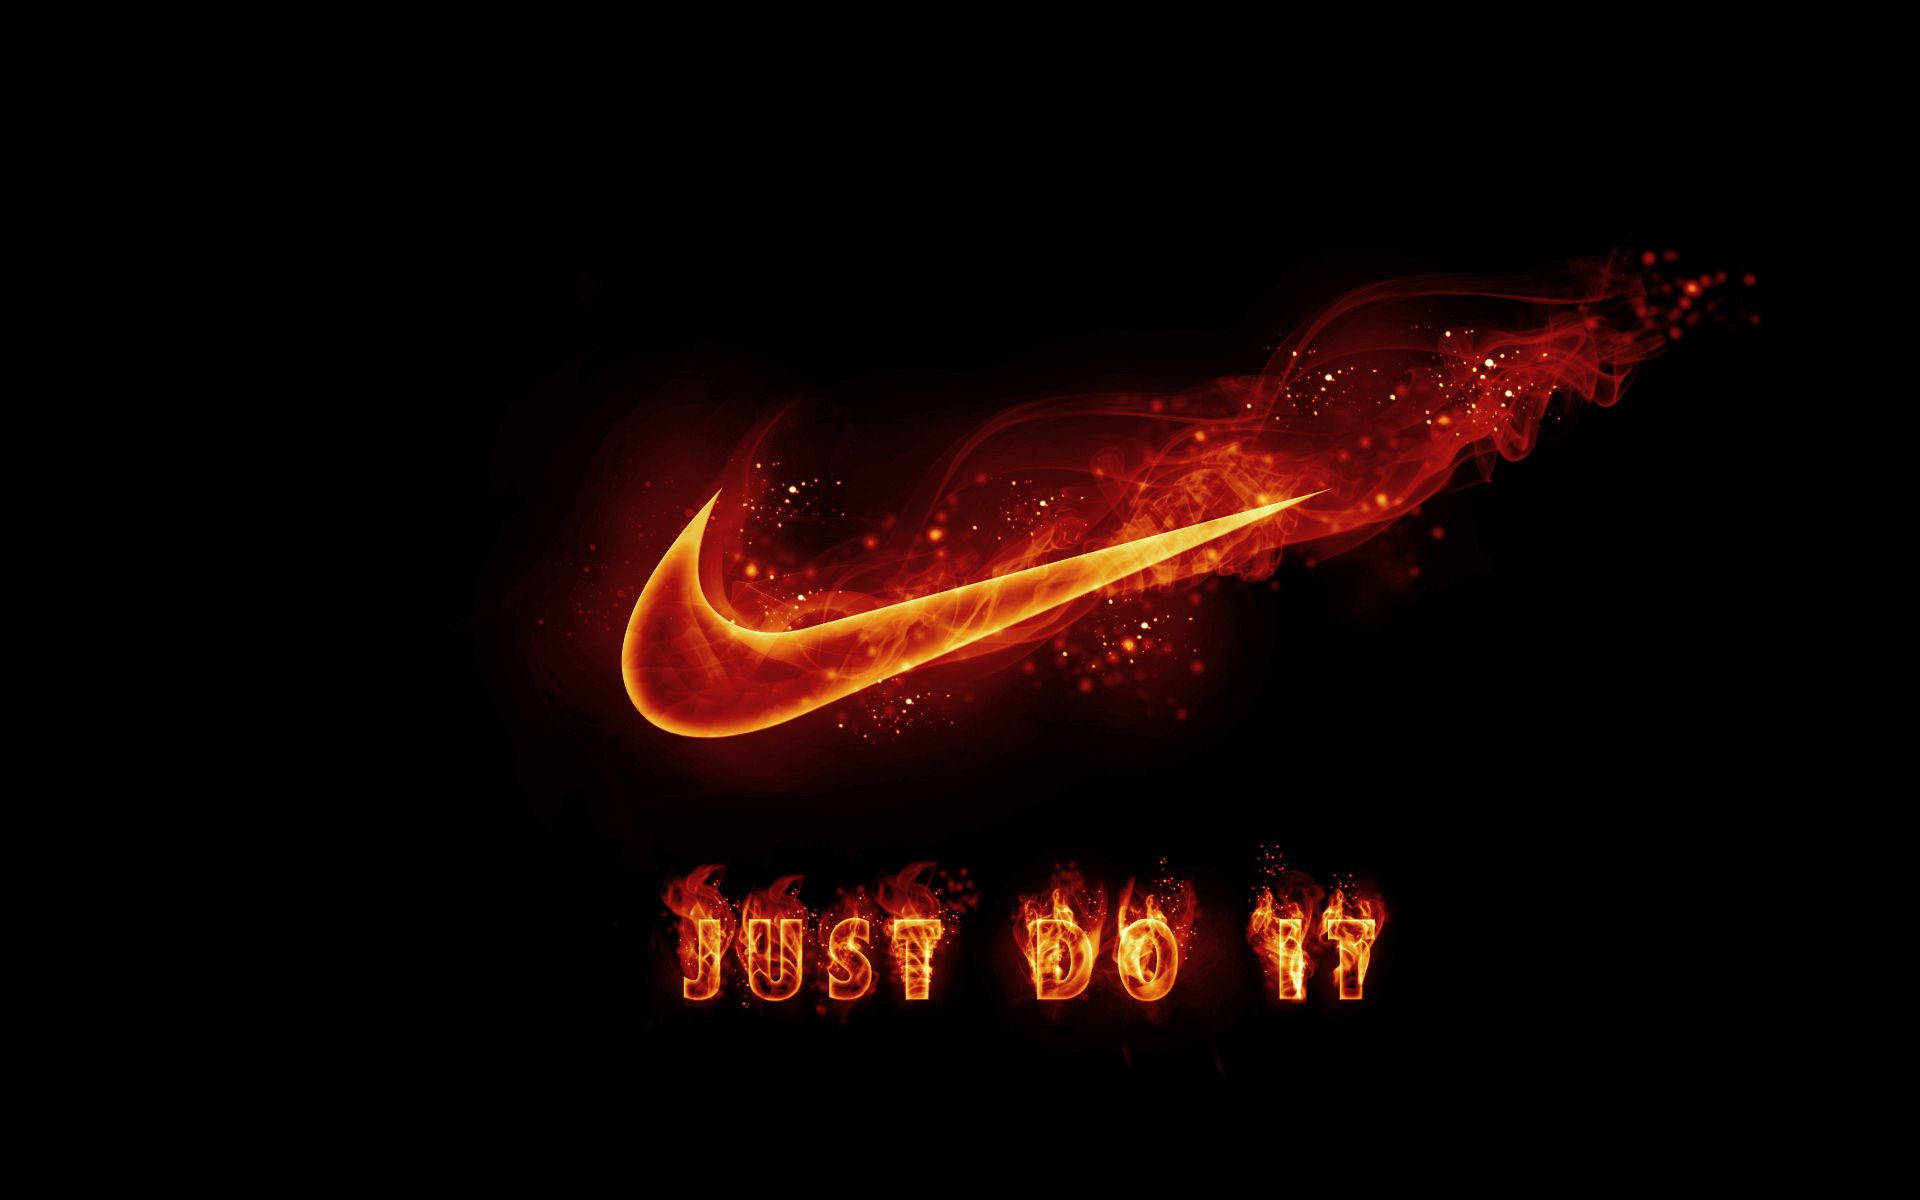 Cool Nike Swoosh With Flames Background